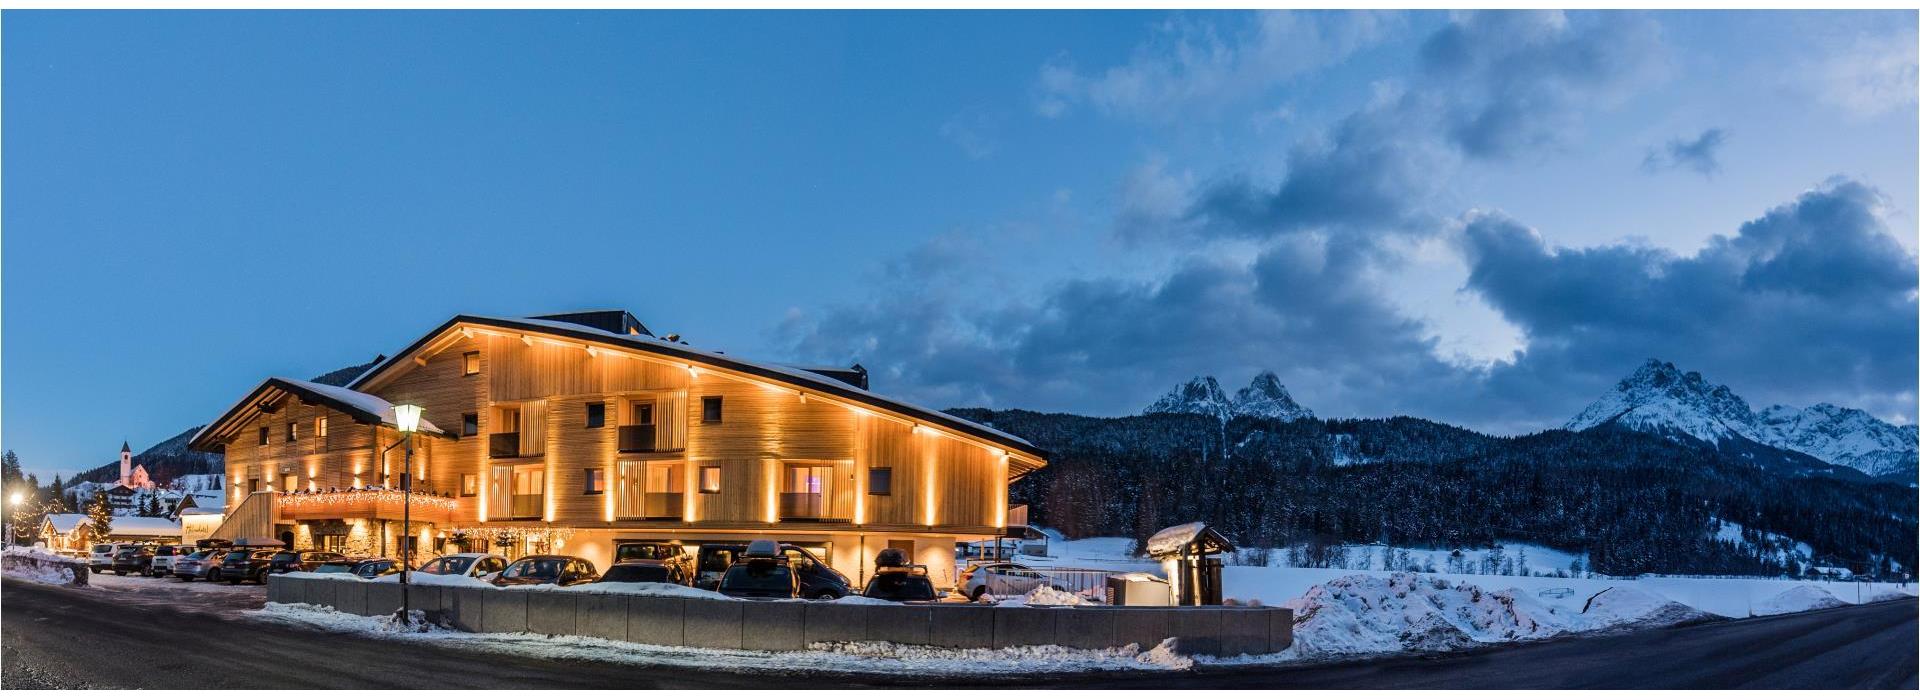 Helmhotel in inverno